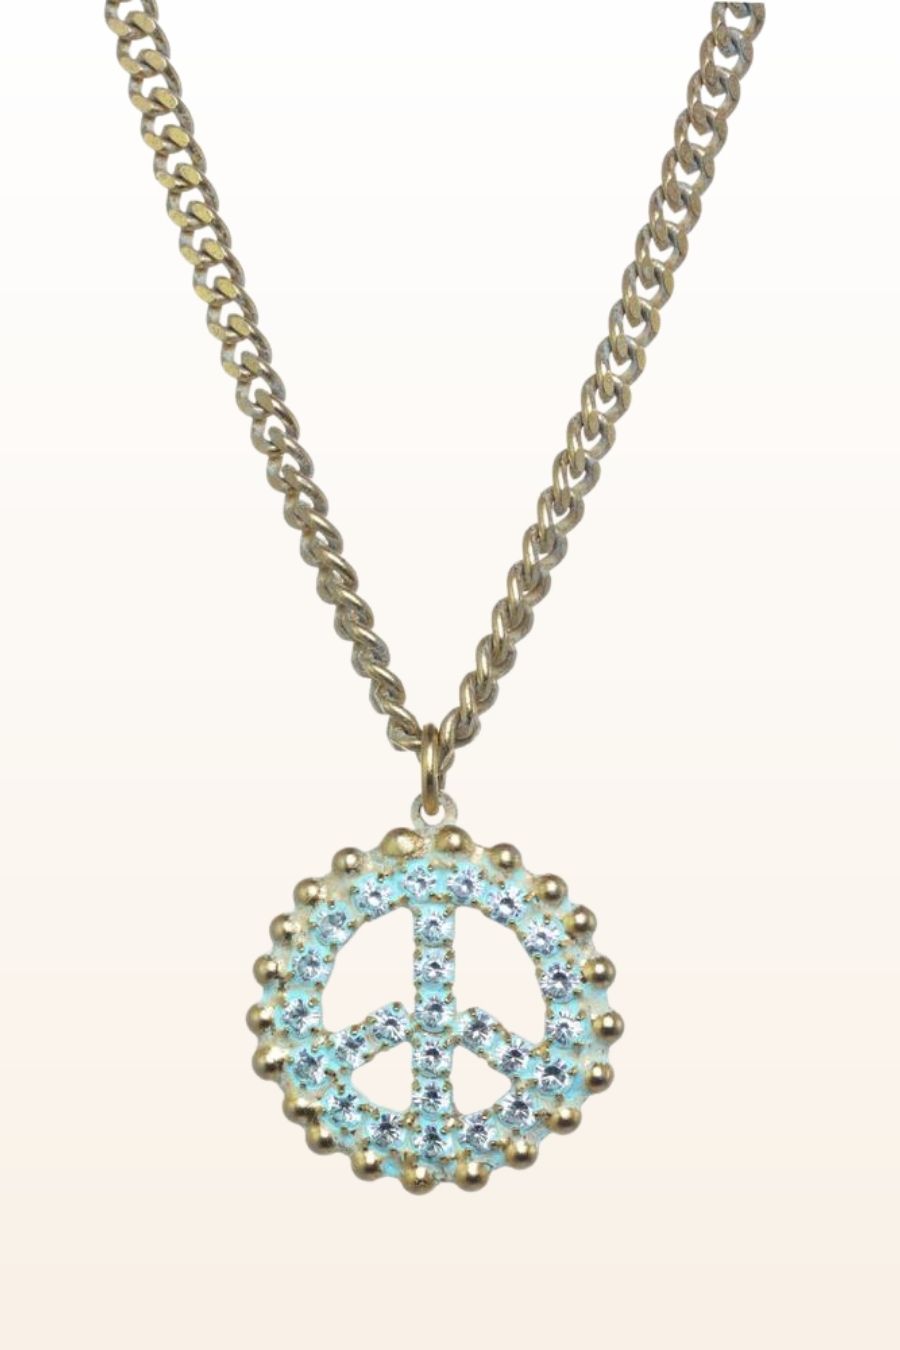 Peace Out Necklace